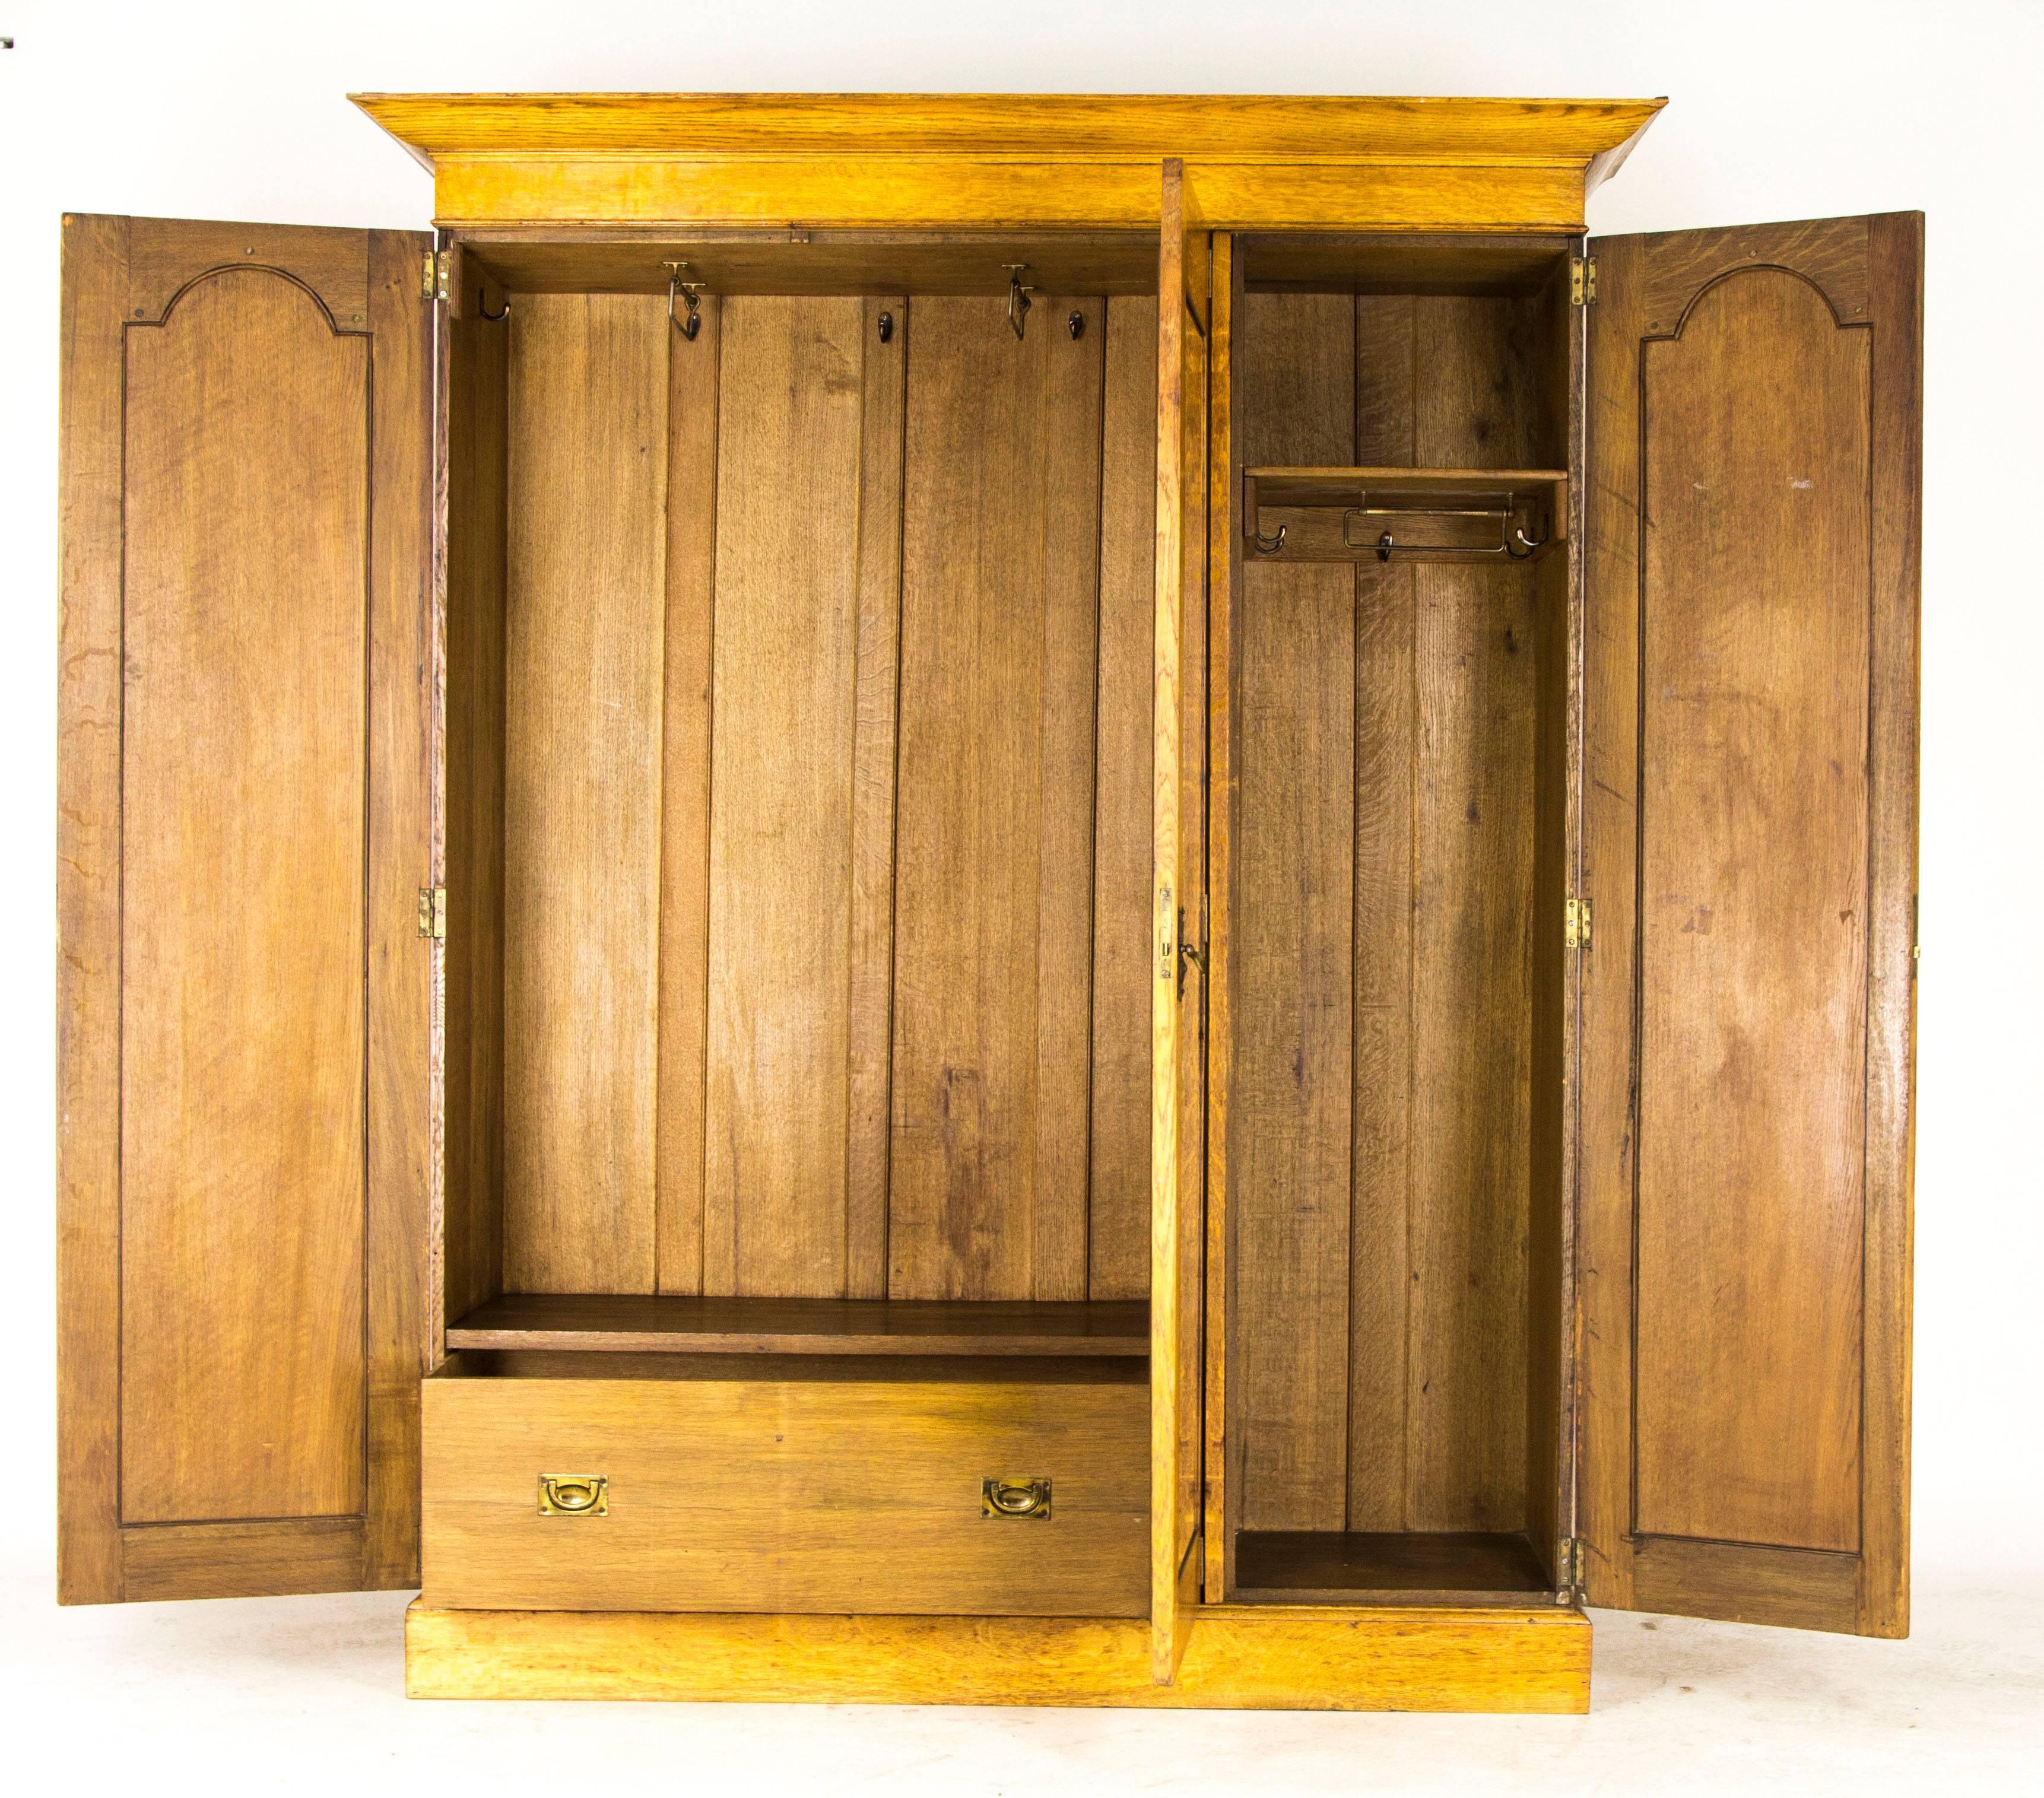 Scotland
1910
Solid oak construction
Probably designed by George Logan for Wylie and Lockhead
Flared cornice above
Central beveled mirror door
Flanked by two shaped doors with stylized floral inlay designs
Arts & Crafts cover plate with shaped